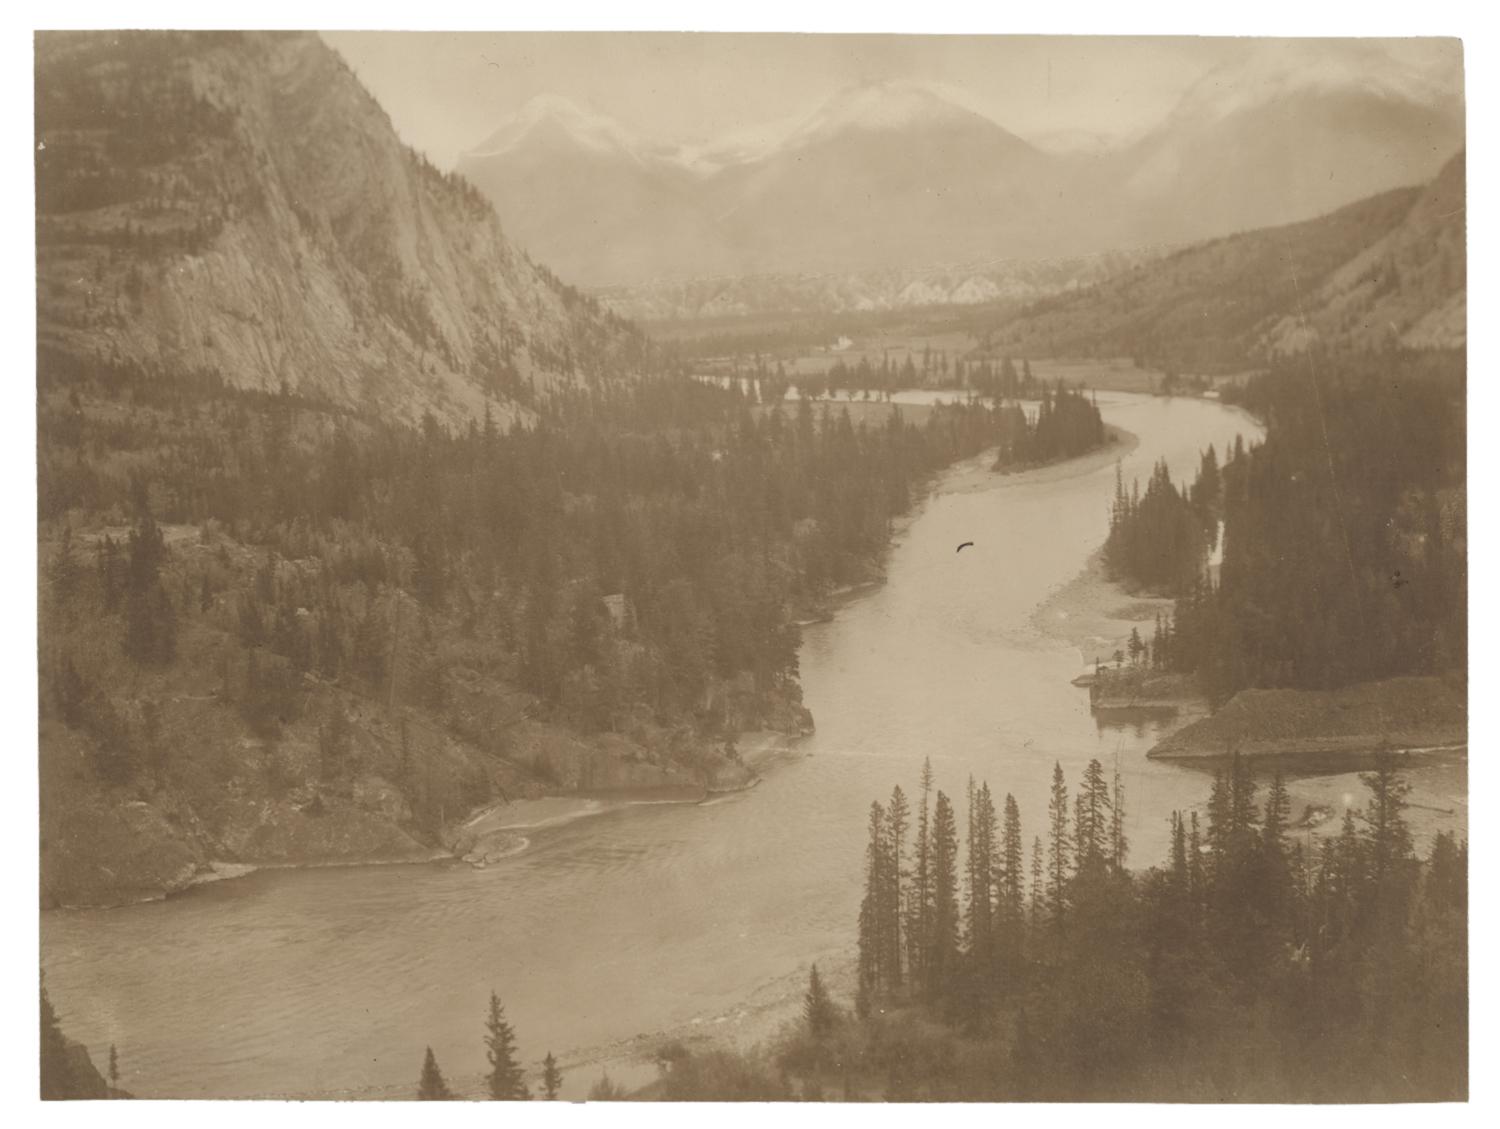 Landscape view of a river flowing through trees and mountains. Black and white photograph by Minna Keene.